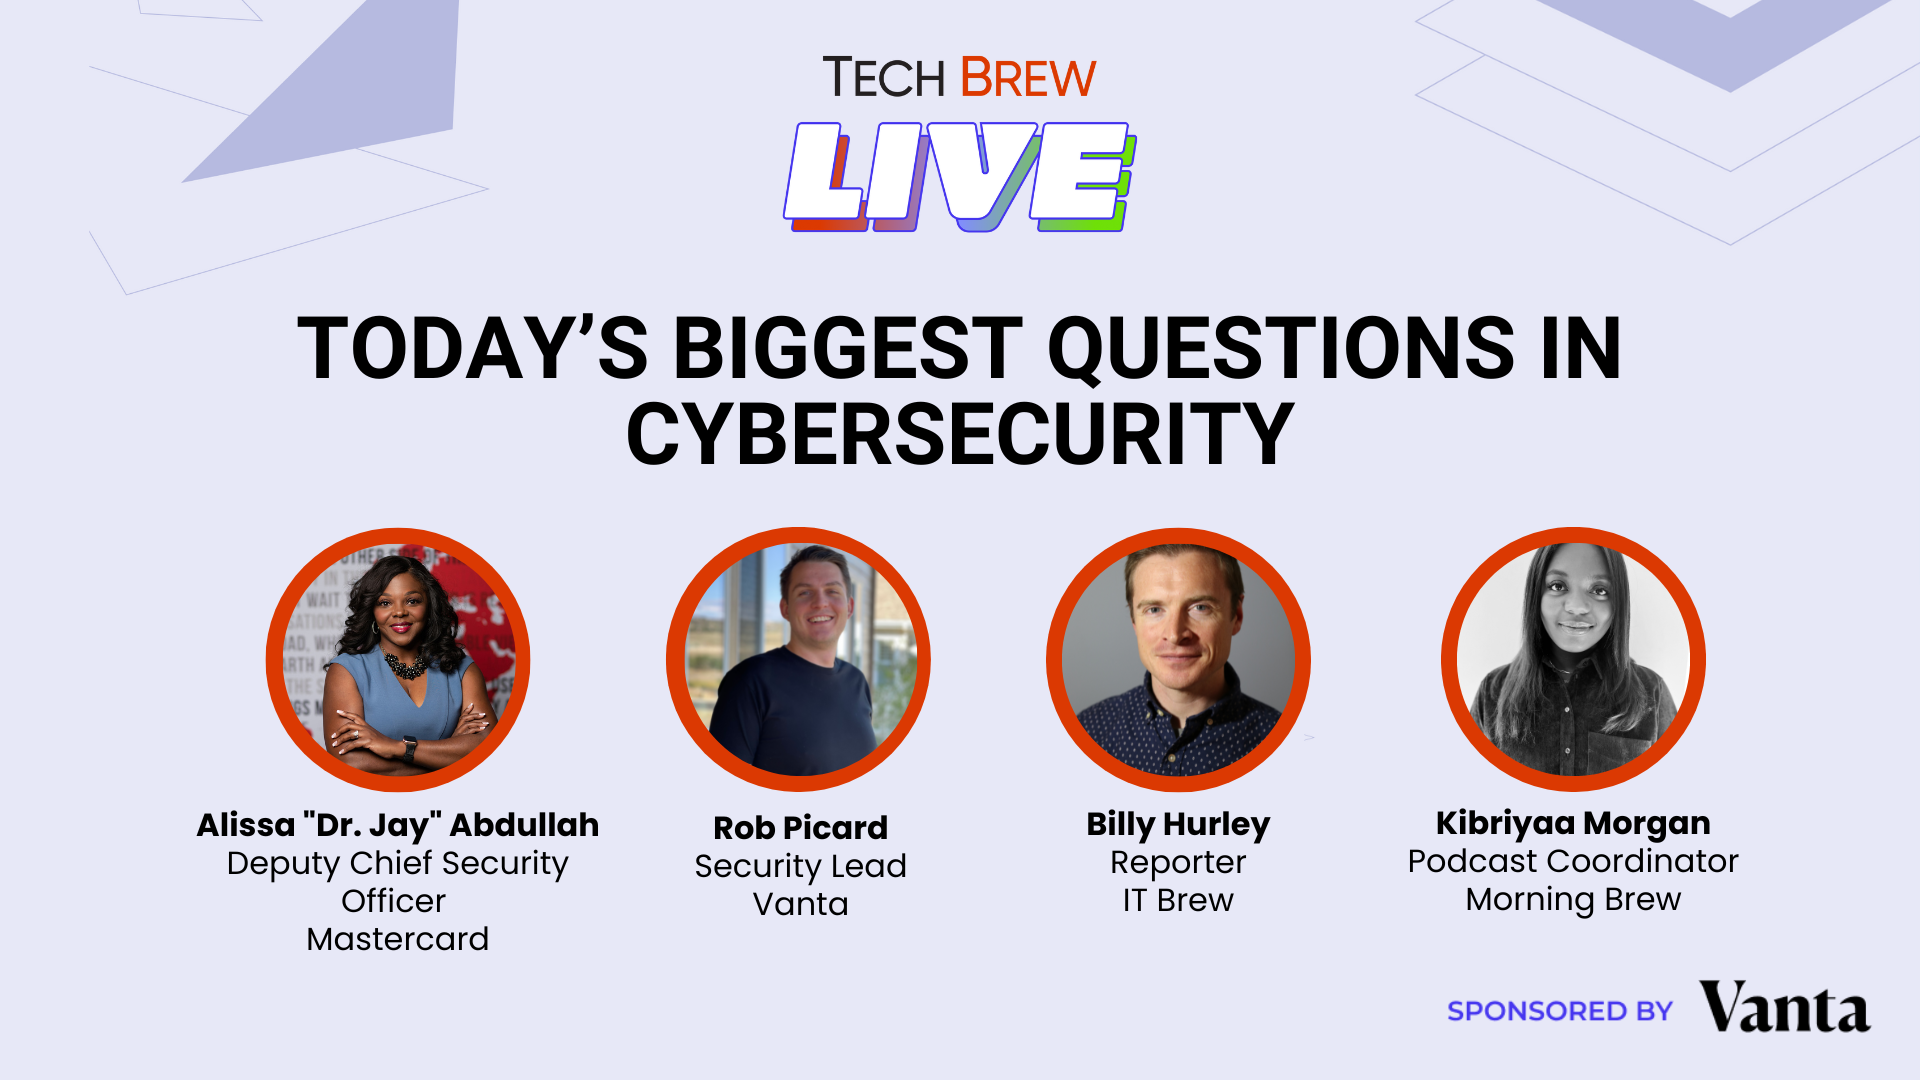 Tech Brew Live logo with "Today's Biggest Questions in Cybersecurity" text and four presenters headshots with "Sponsored by Vanta" at the bottom